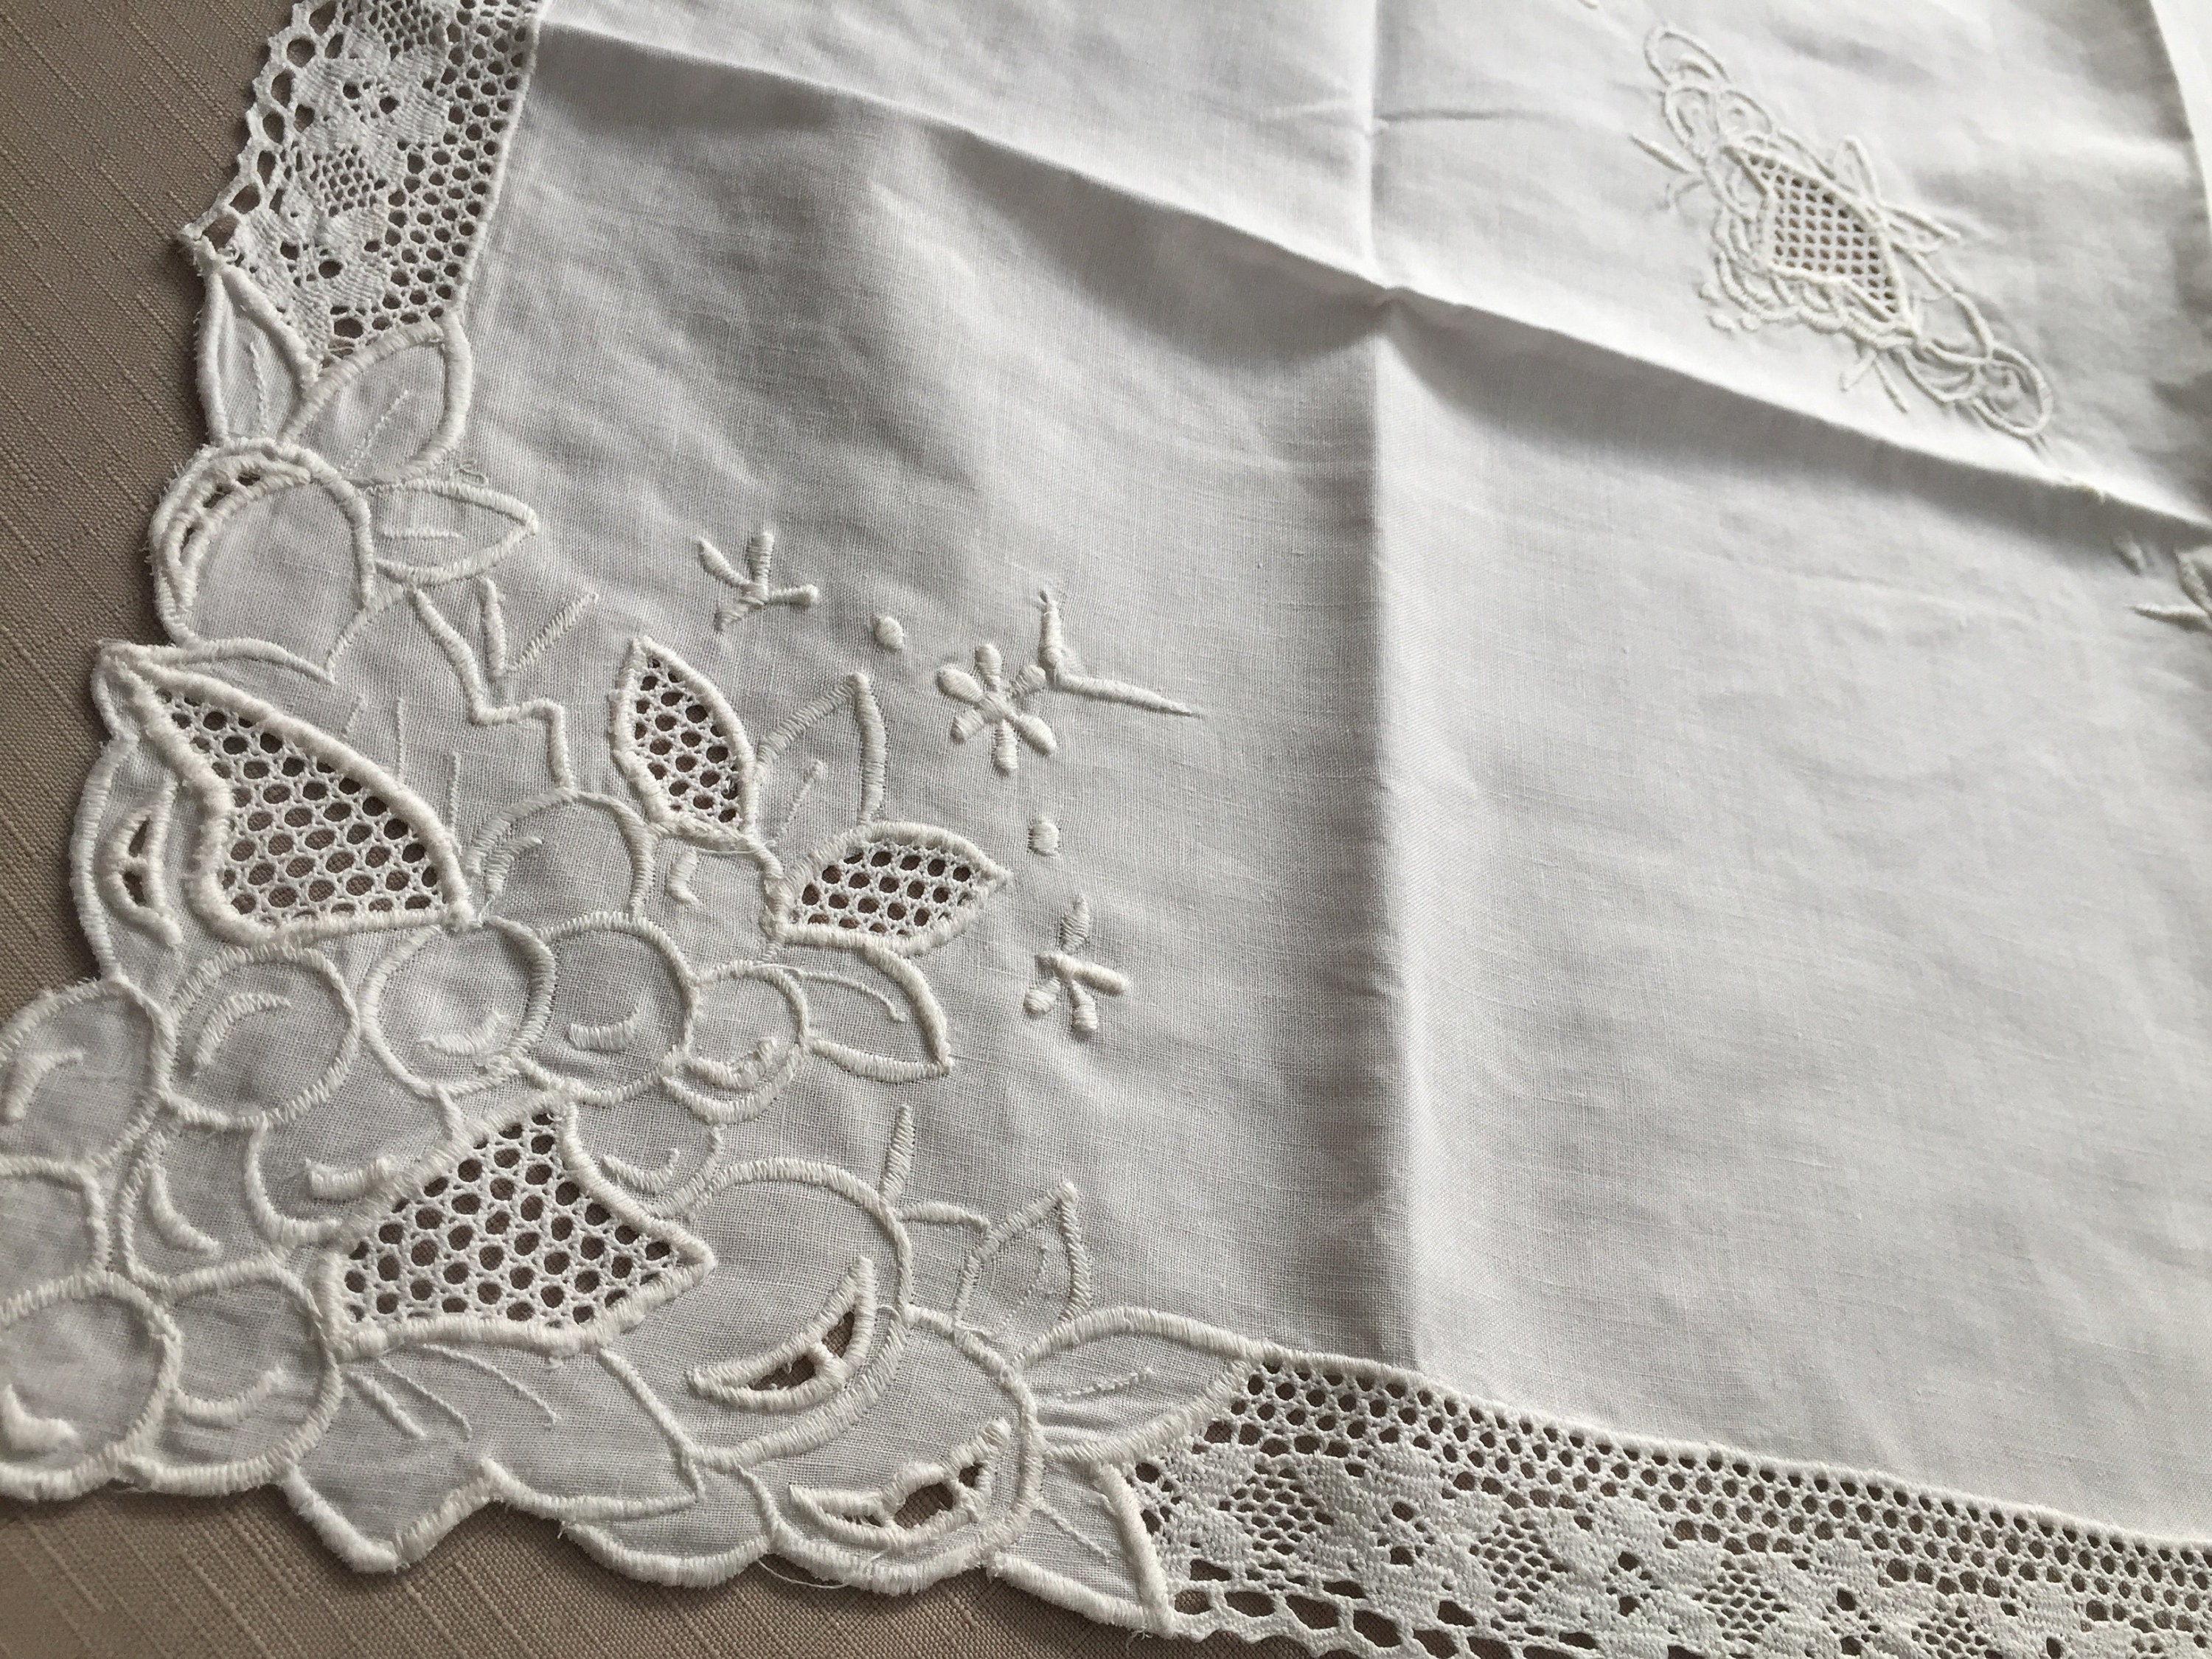 Embroidered White Tablecloth With Lace Inserts and Edging | Etsy Australia